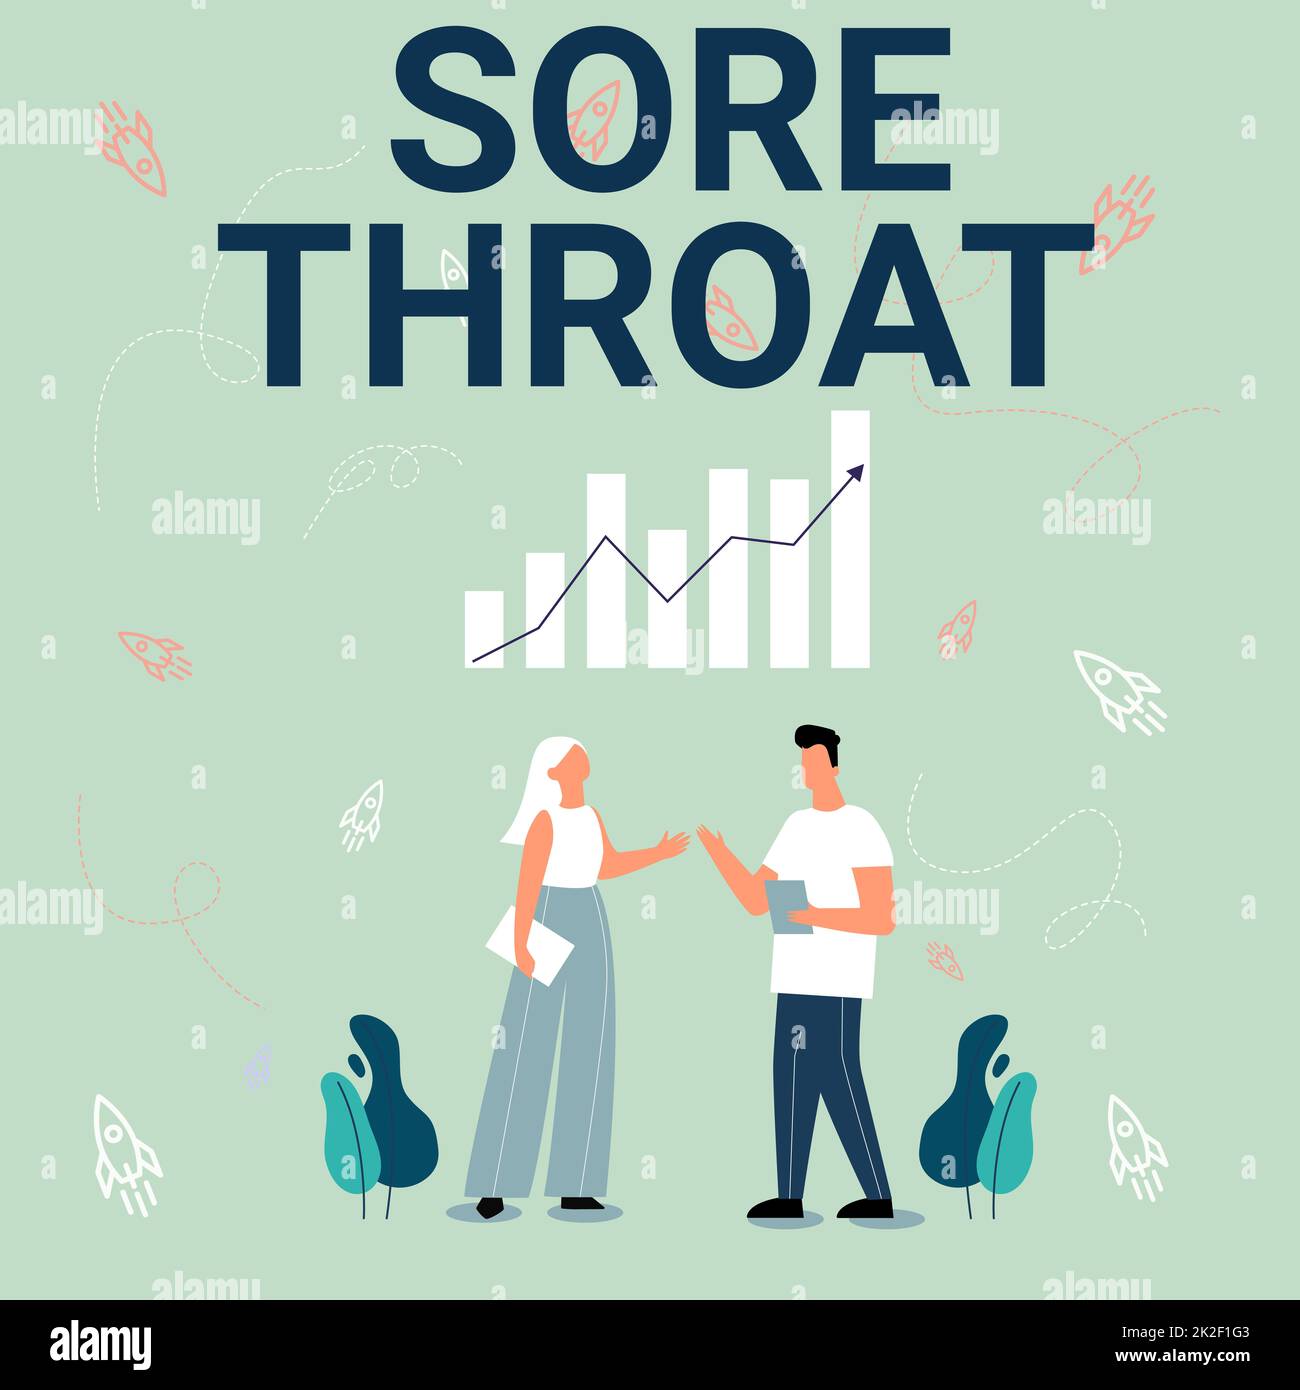 Sign displaying Sore Throat. Business idea Inflammation ot the pharynx and fauces resulted from an irritation Illustration Of Partners Sharing Wonderful Ideas For Skill Improvement. Stock Photo